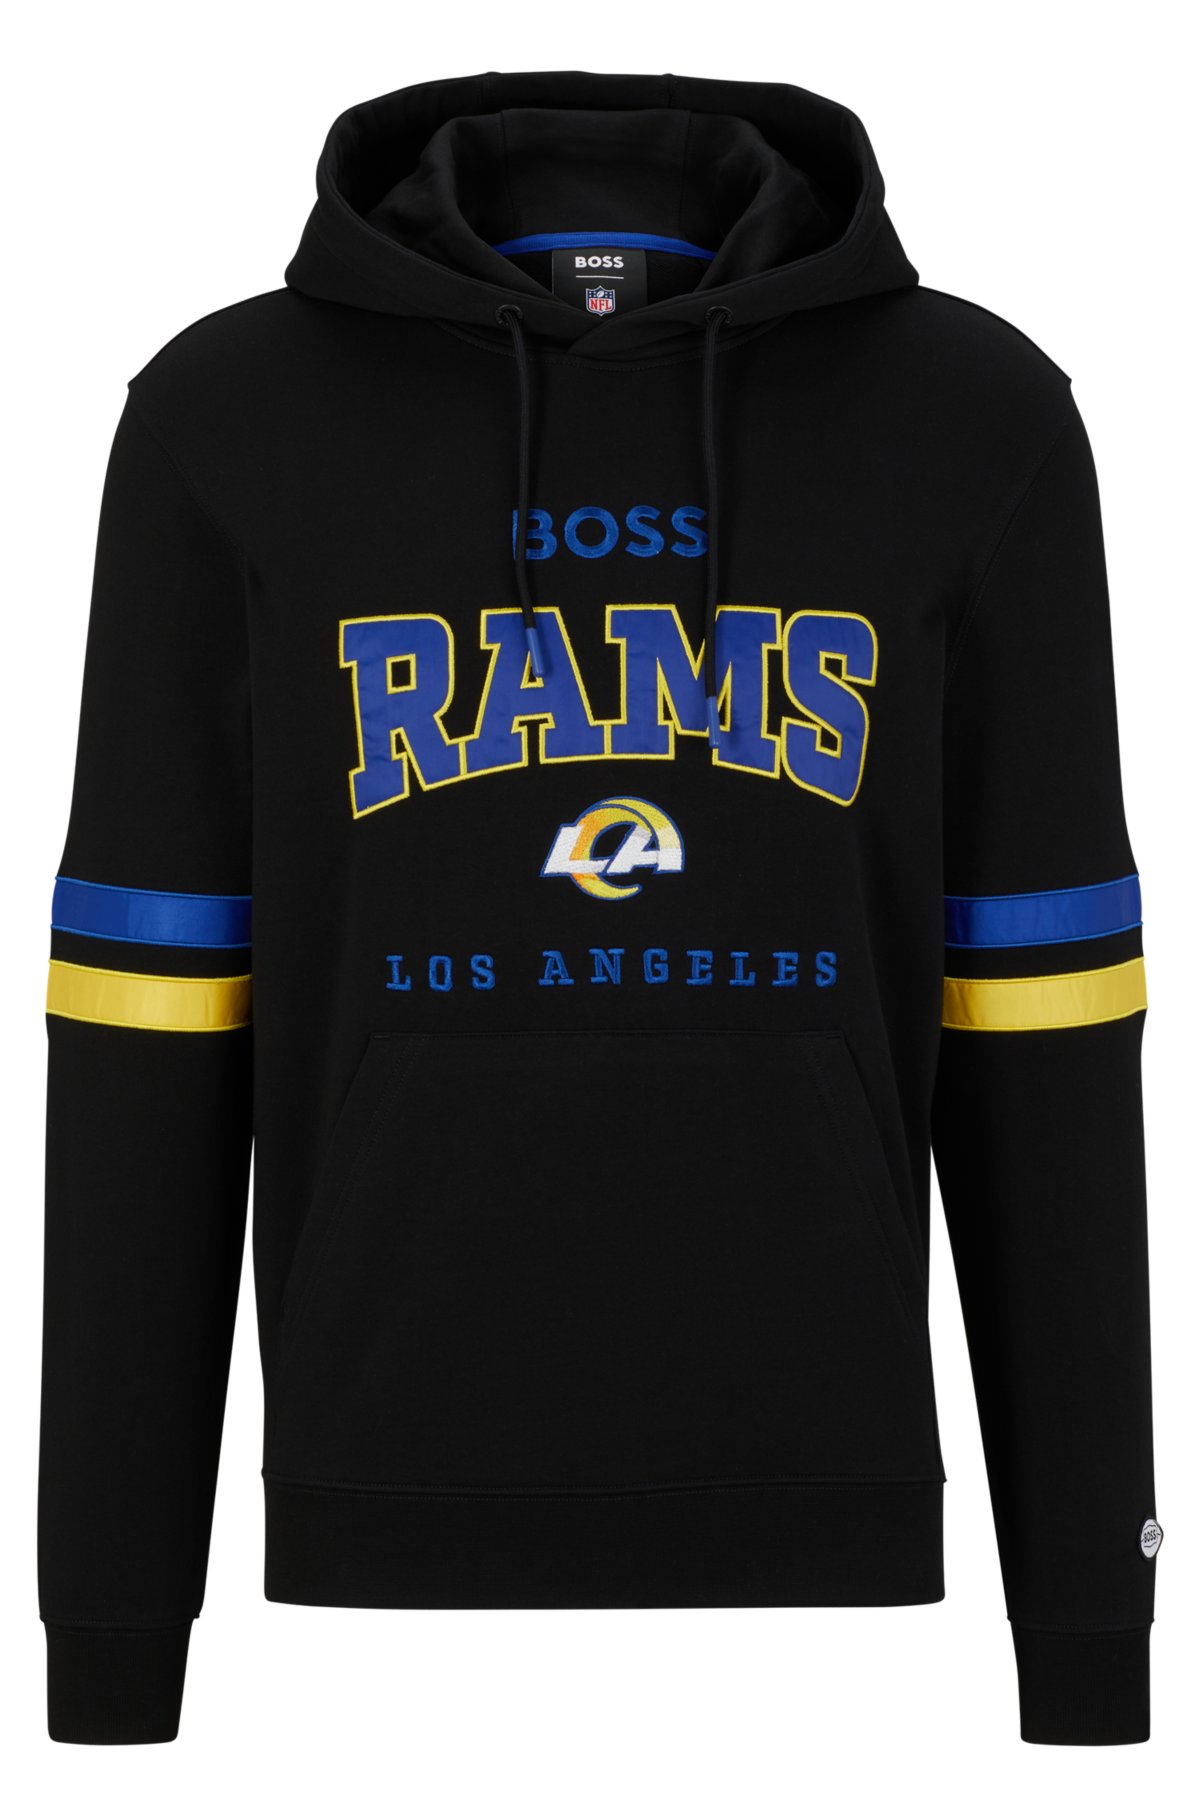 BOSS x NFL cotton-terry hoodie with collaborative branding, Rams